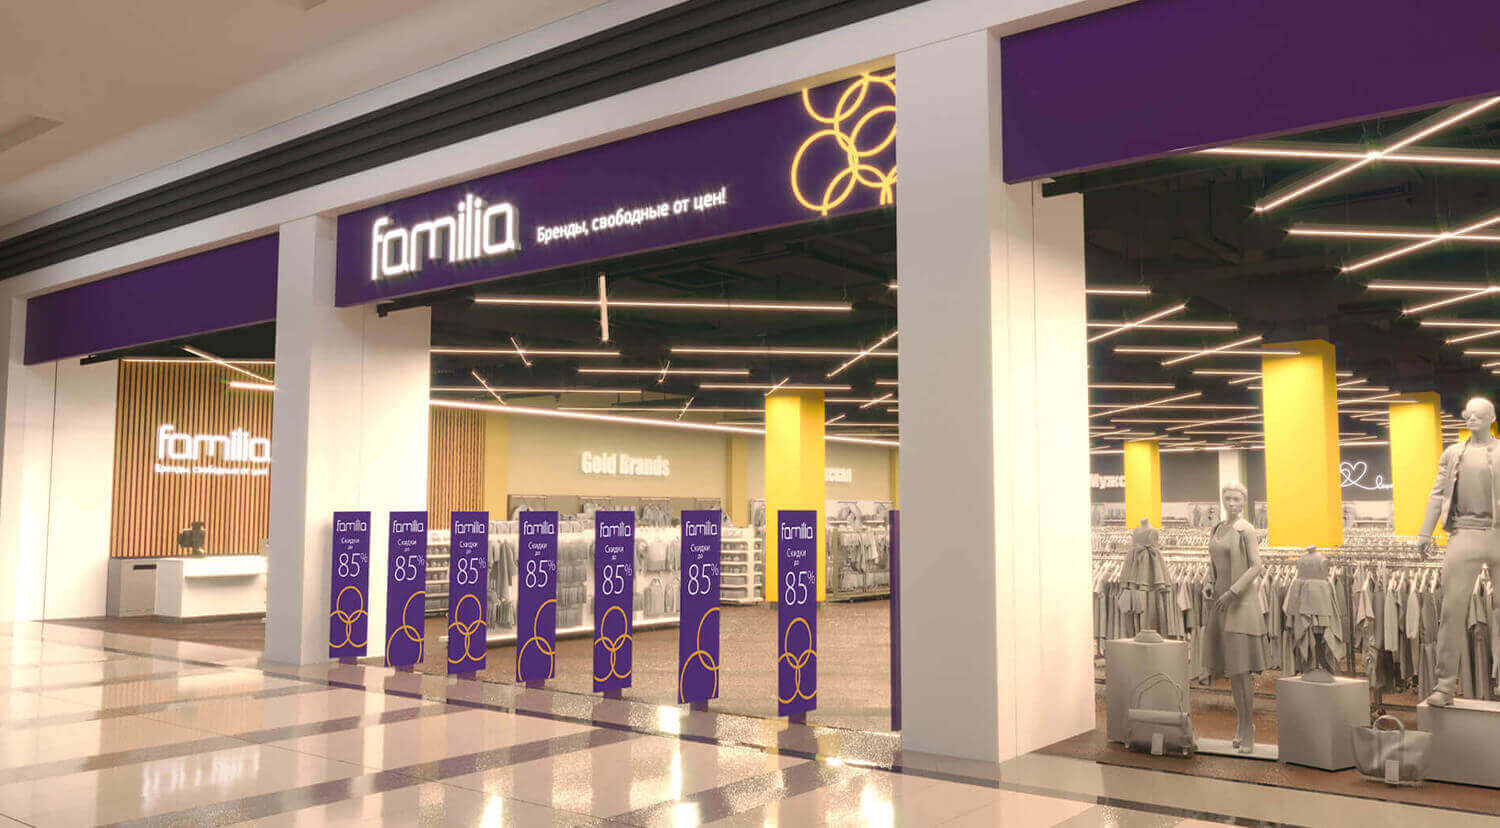 Familia fashion store Russia, Store Entrance, Interior Design, Spectacular Ceiling Lighting, Merchandising and Equipment, Retail - CampbellRigg Agency